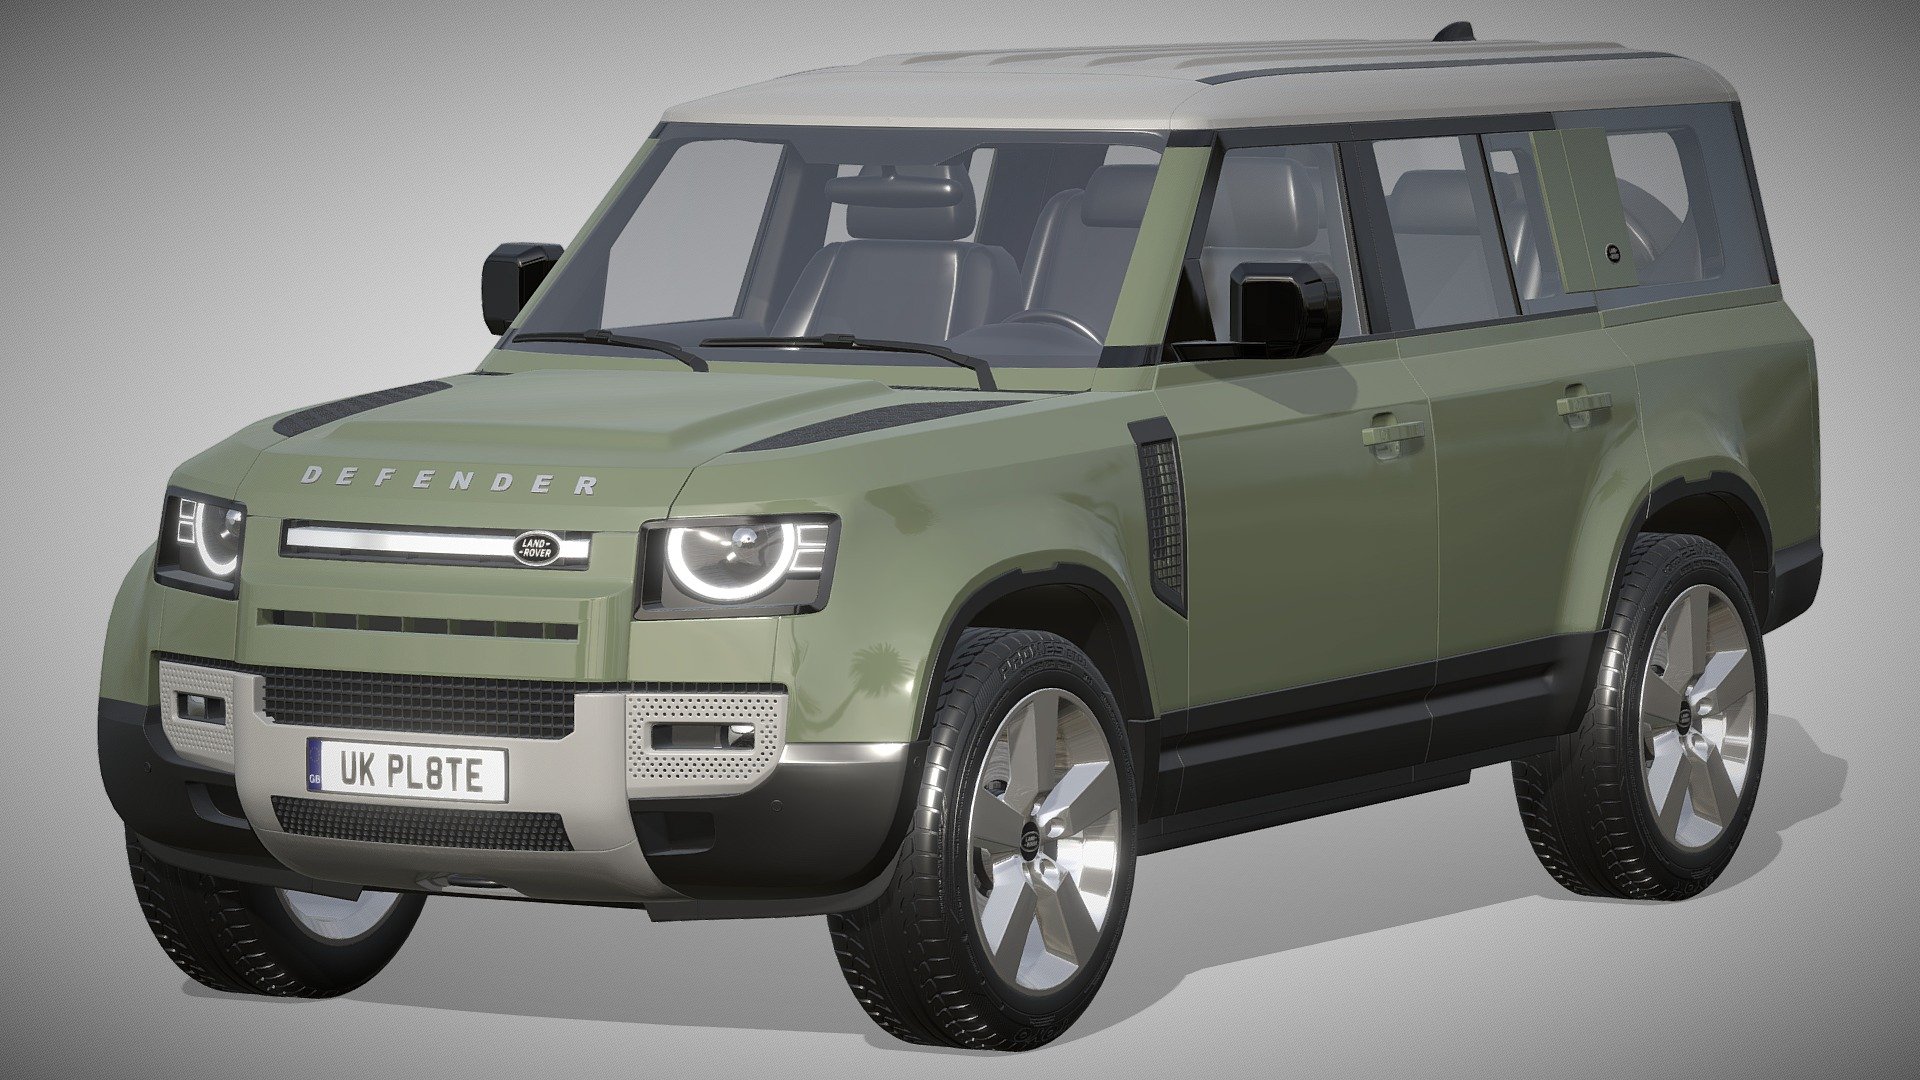 Land Rover Defender 130 2023

https://www.landrover.com/vehicles/defender/index.html

Clean geometry Light weight model, yet completely detailed for HI-Res renders. Use for movies, Advertisements or games

Corona render and materials

All textures include in *.rar files

Lighting setup is not included in the file! - Land Rover Defender 130 2023 - Buy Royalty Free 3D model by zifir3d 3d model